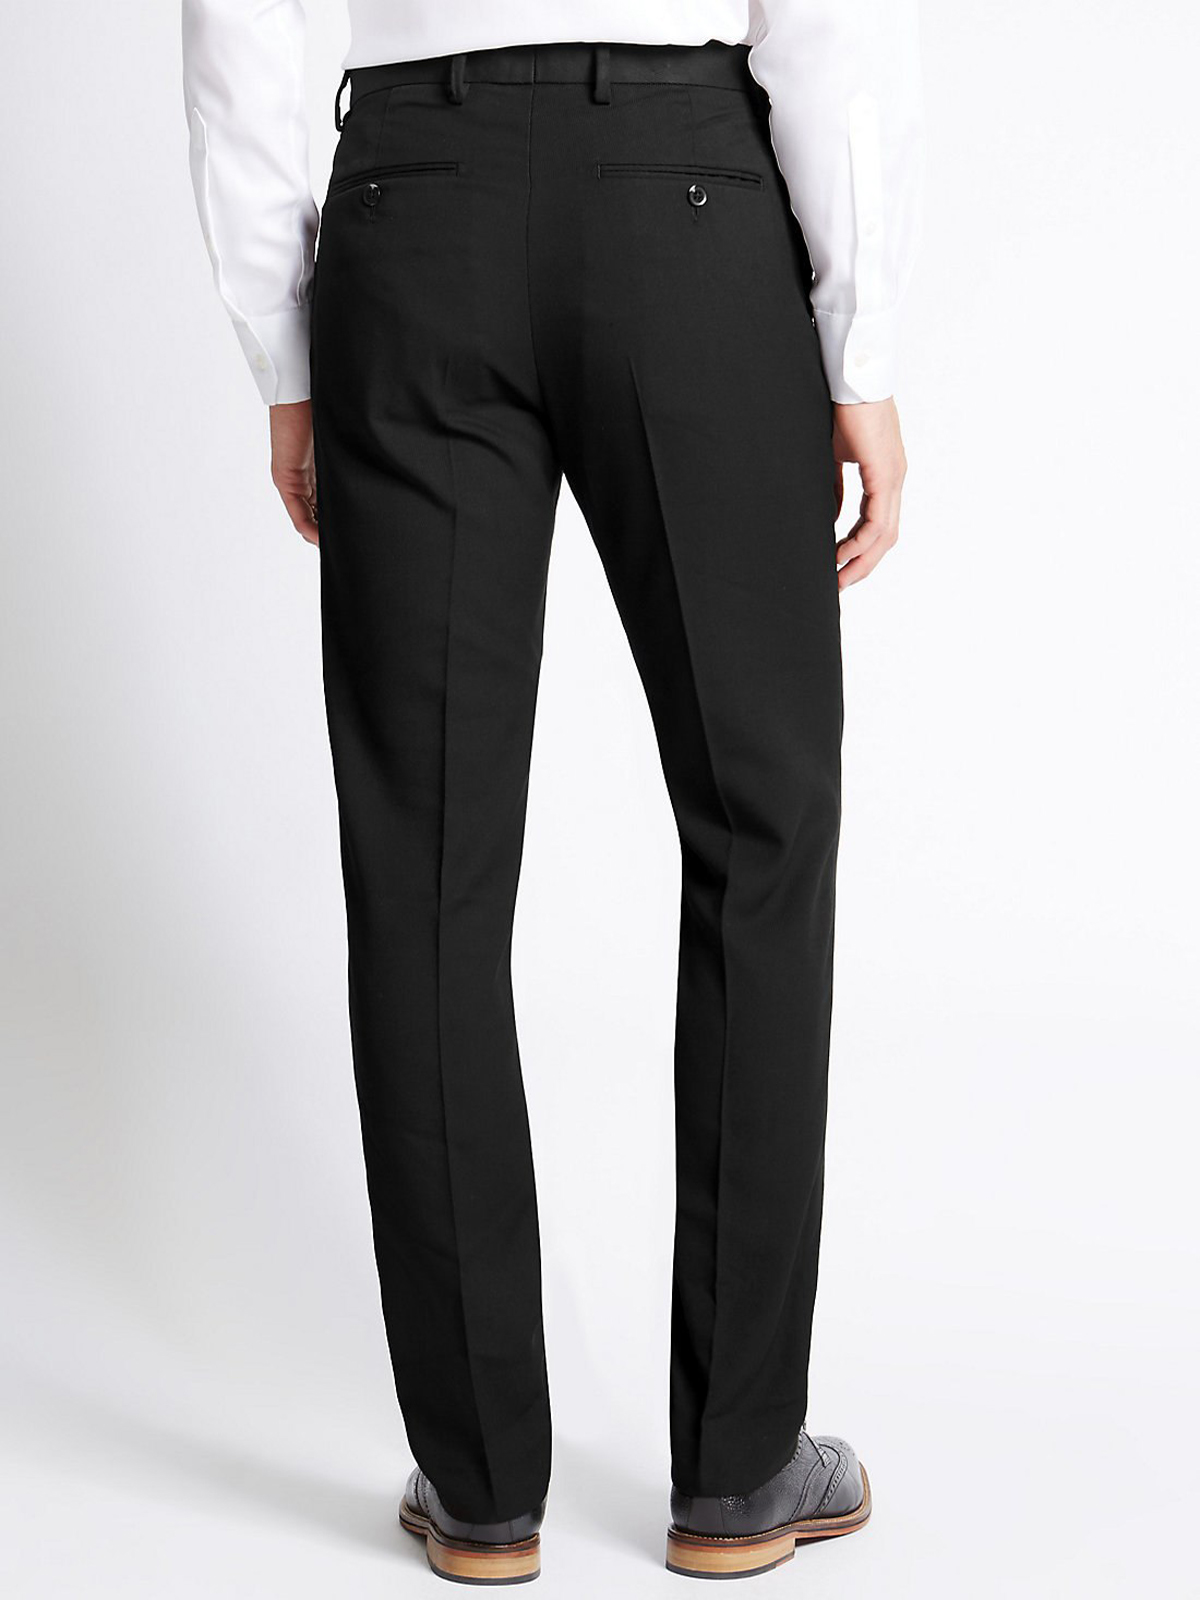 Marks and Spencer - - M&5 BLACK Tailored Fit Flat Front Trousers ...